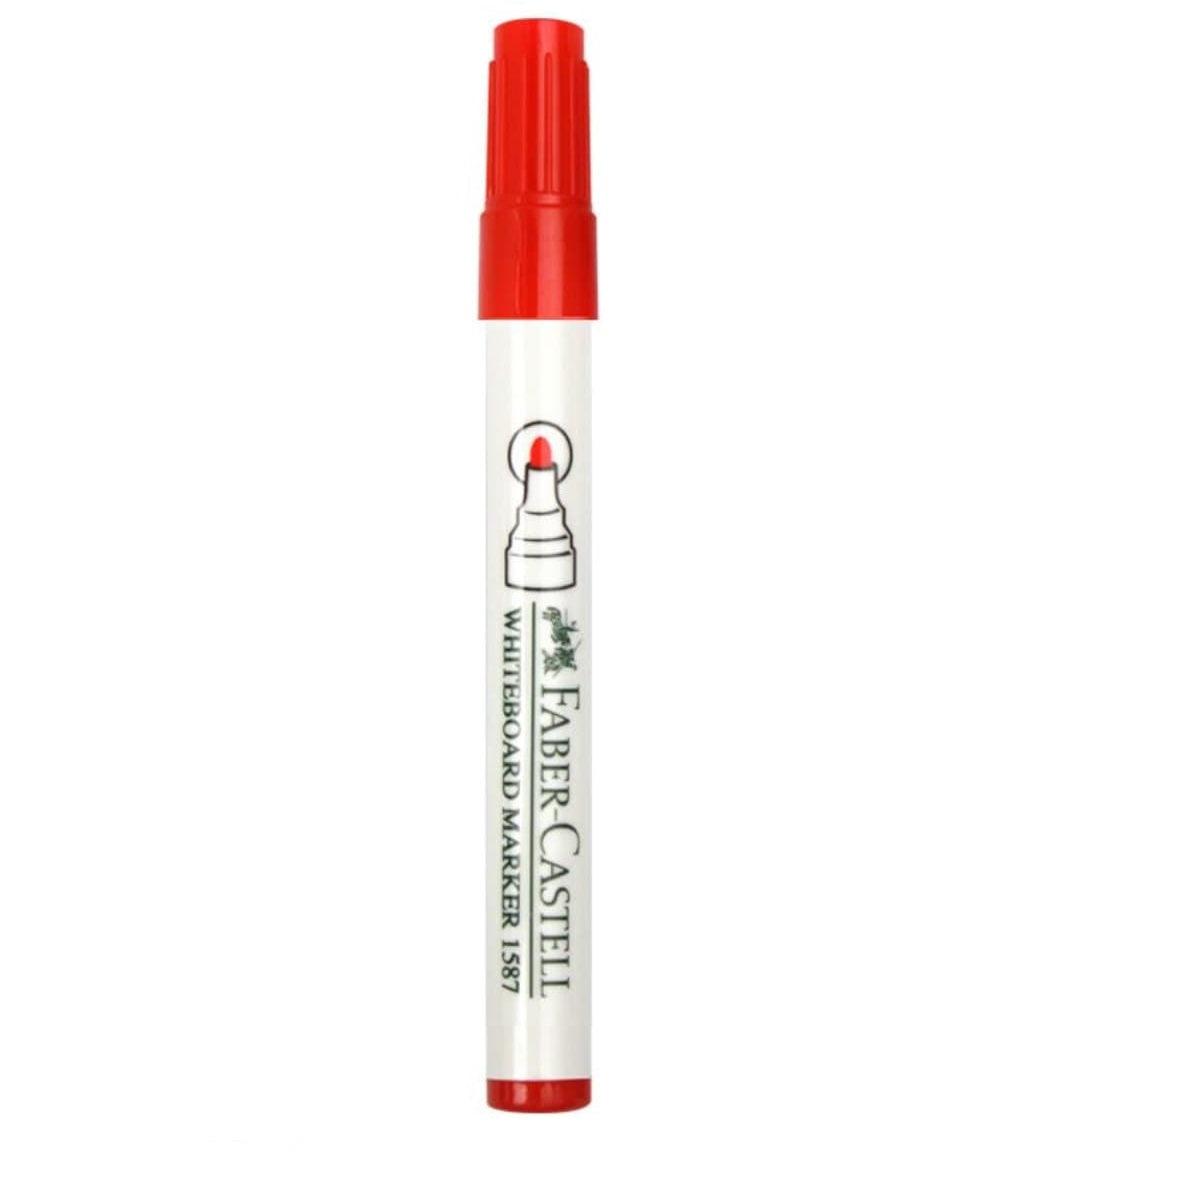 Faber Castell Whiteboard Marker Round Tip Red / 87217 - Karout Online -Karout Online Shopping In lebanon - Karout Express Delivery 